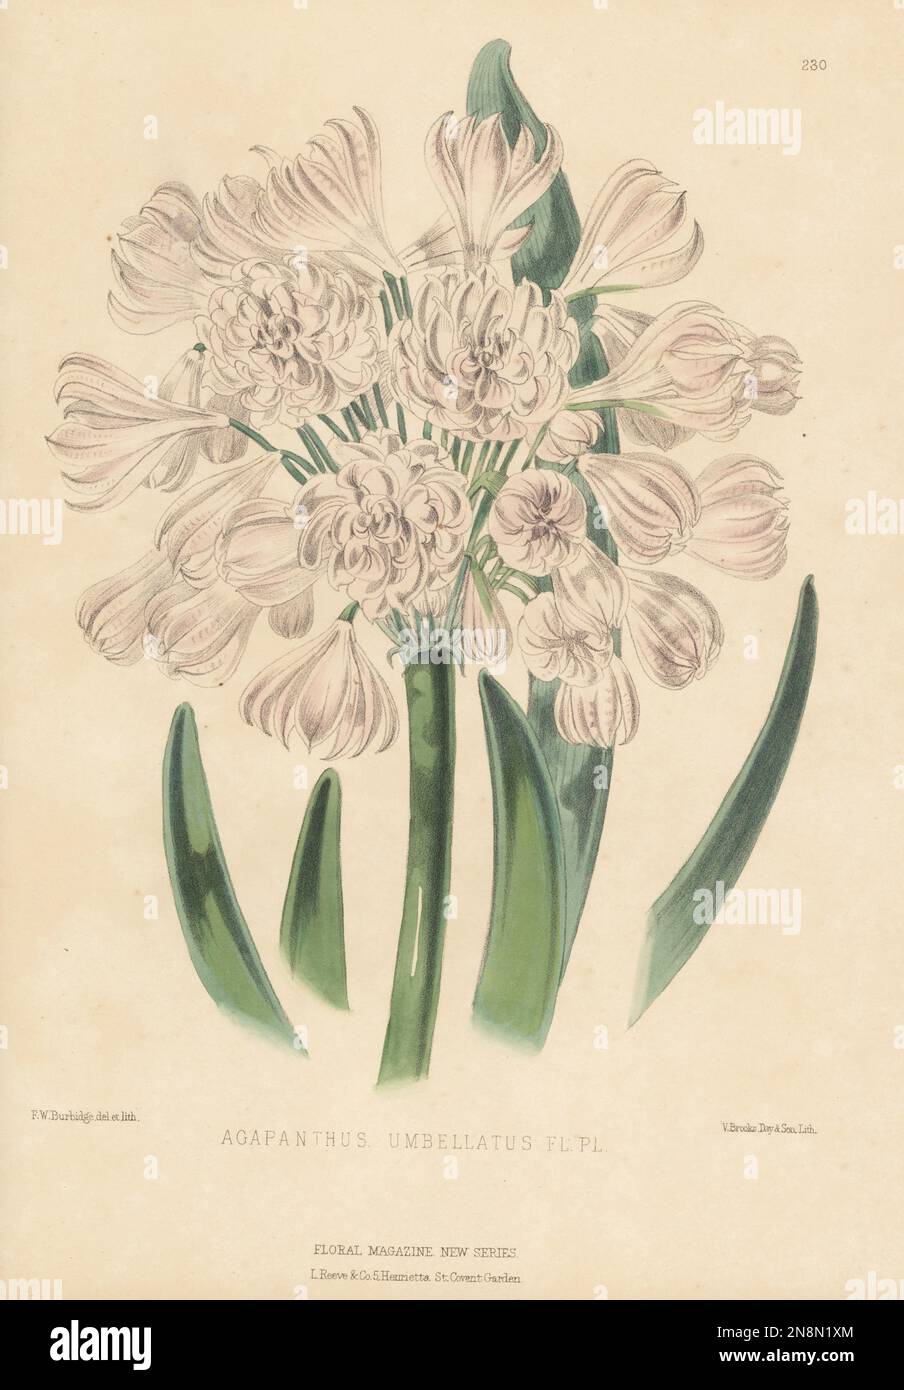 African lily, Agapanthus africanus, native to South Africa from the Cape to Swellendam. Raised by Bernard Samuel Williams of Holloway. As double-blossomed love flower, Agapanthus umbellatus. Handcolored botanical illustration drawn and lithographed by Frederick William Burbidge from Henry Honywood Dombrain's Floral Magazine, New Series, Volume 5, L. Reeve, London, 1876. Lithograph printed by Vincent Brooks, Day & Son. Stock Photo